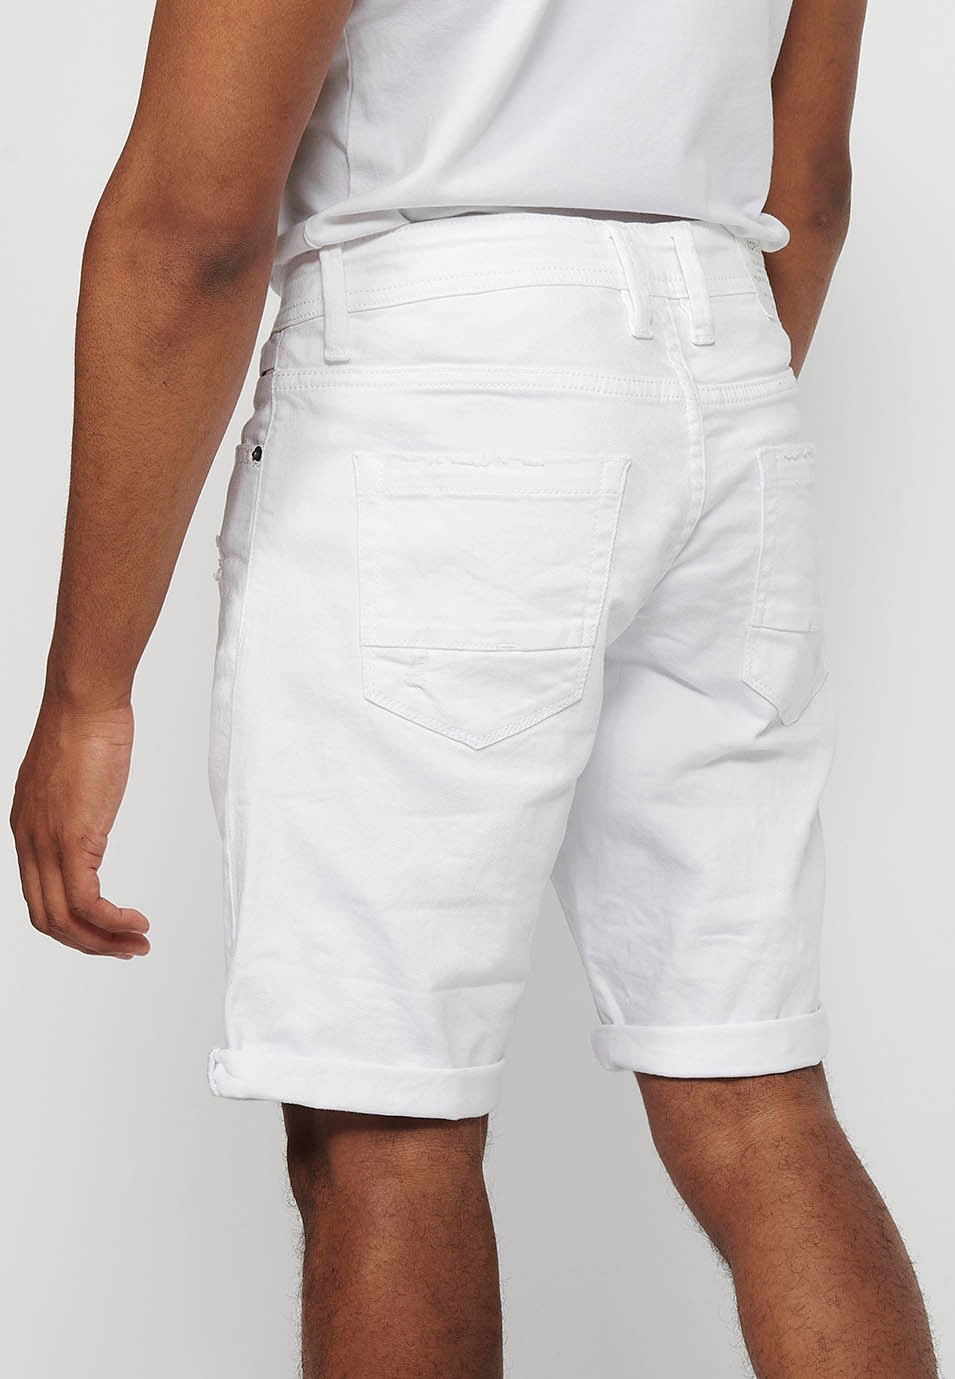 Denim Bermuda shorts with turn-up finish and front closure with zipper and button in White for Men 6